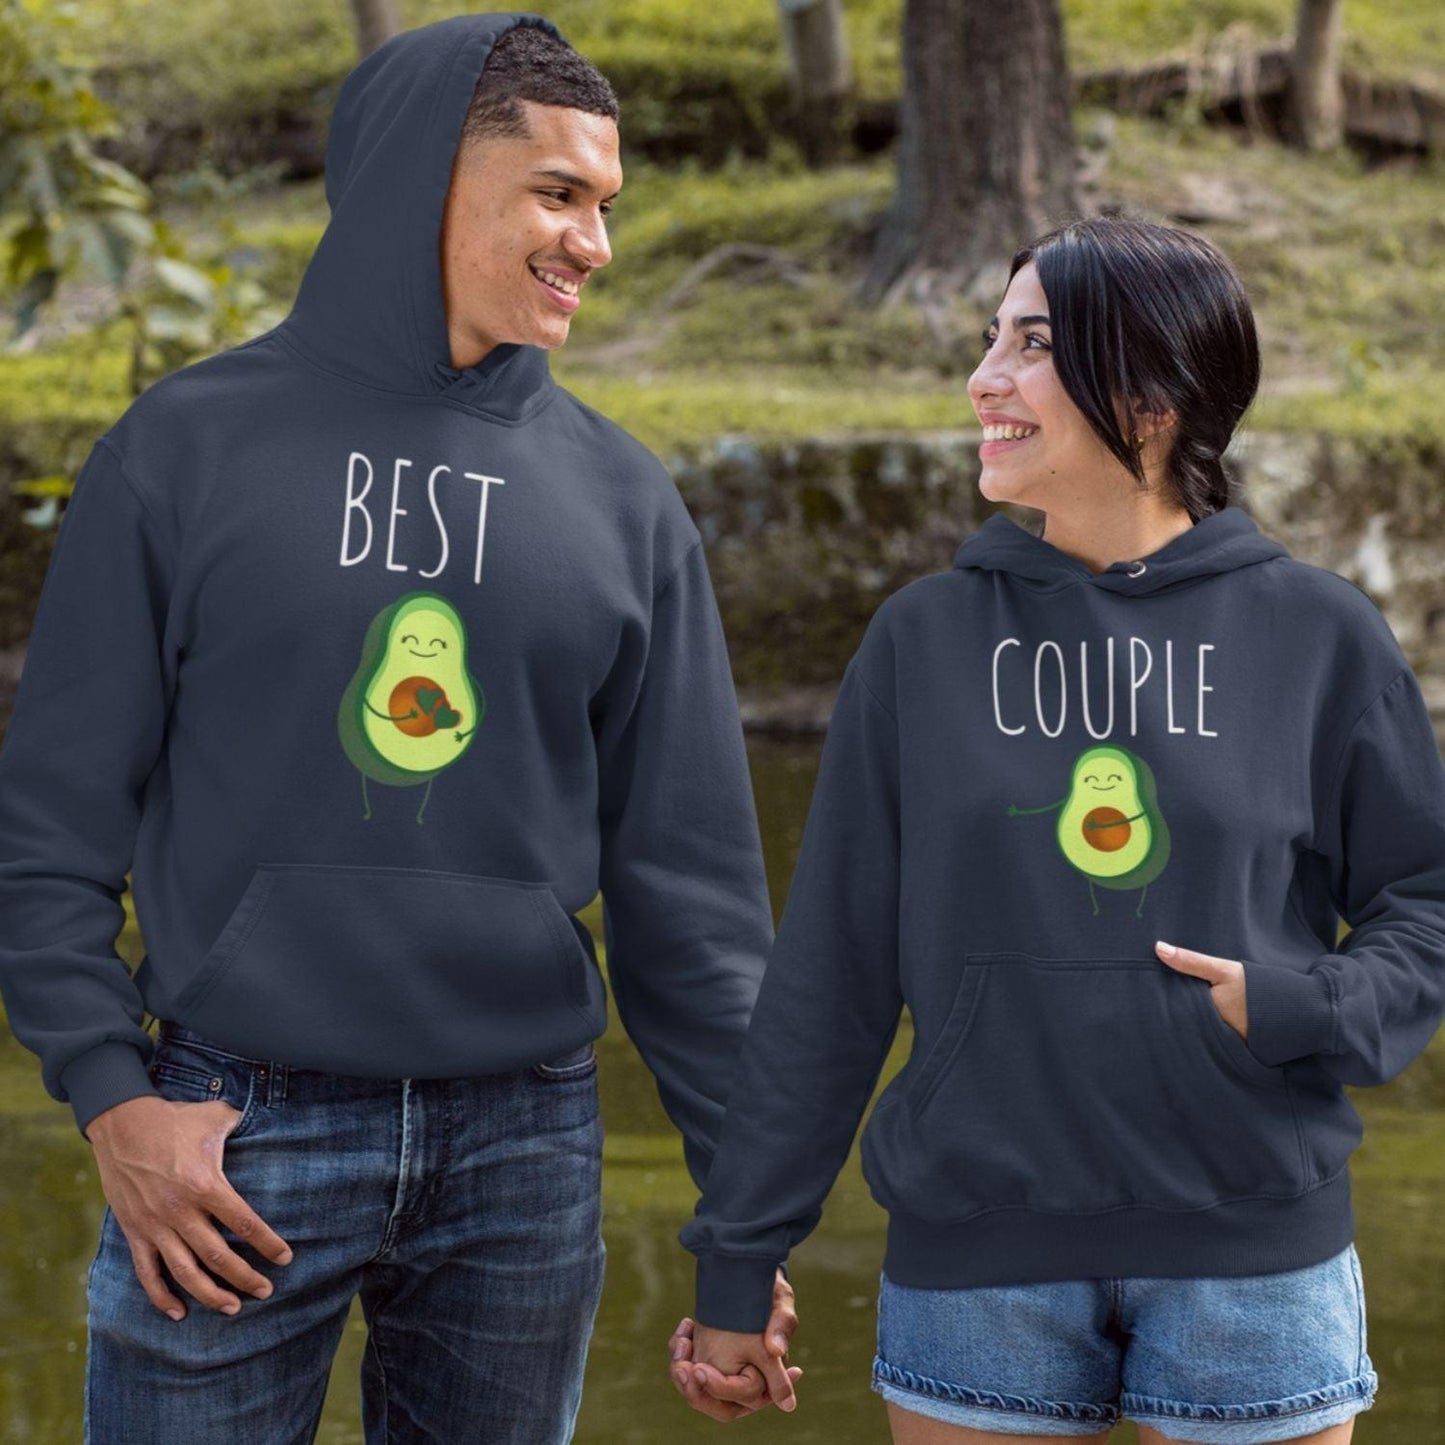 Best Couple Matching Set - Avocado Couple Apparel for Couples - 4Lovebirds